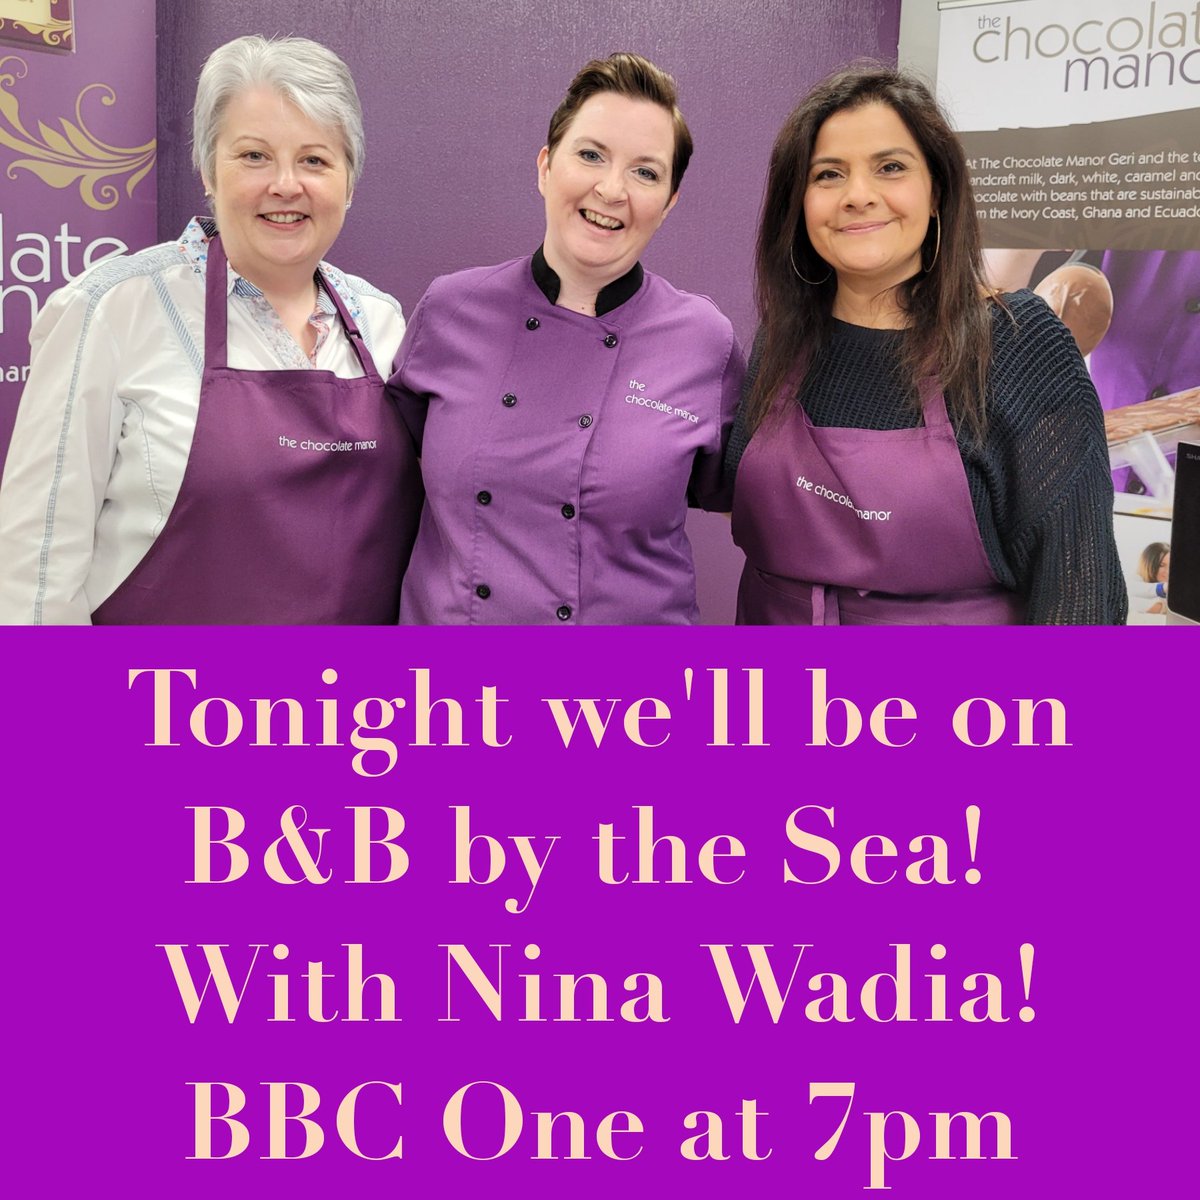 Tonight @BBCOneNI at 7pm you'll be able to watch us on #bandbbythesea B&B by the Sea! We were delighted to welcome @Nina_Wadia to our workshop to handcraft some indulgent chocolate truffles featuring @NIseasalt @AfroMicPro BBC ONE at 7pm and on @bbciplayer! #TasteCauseway